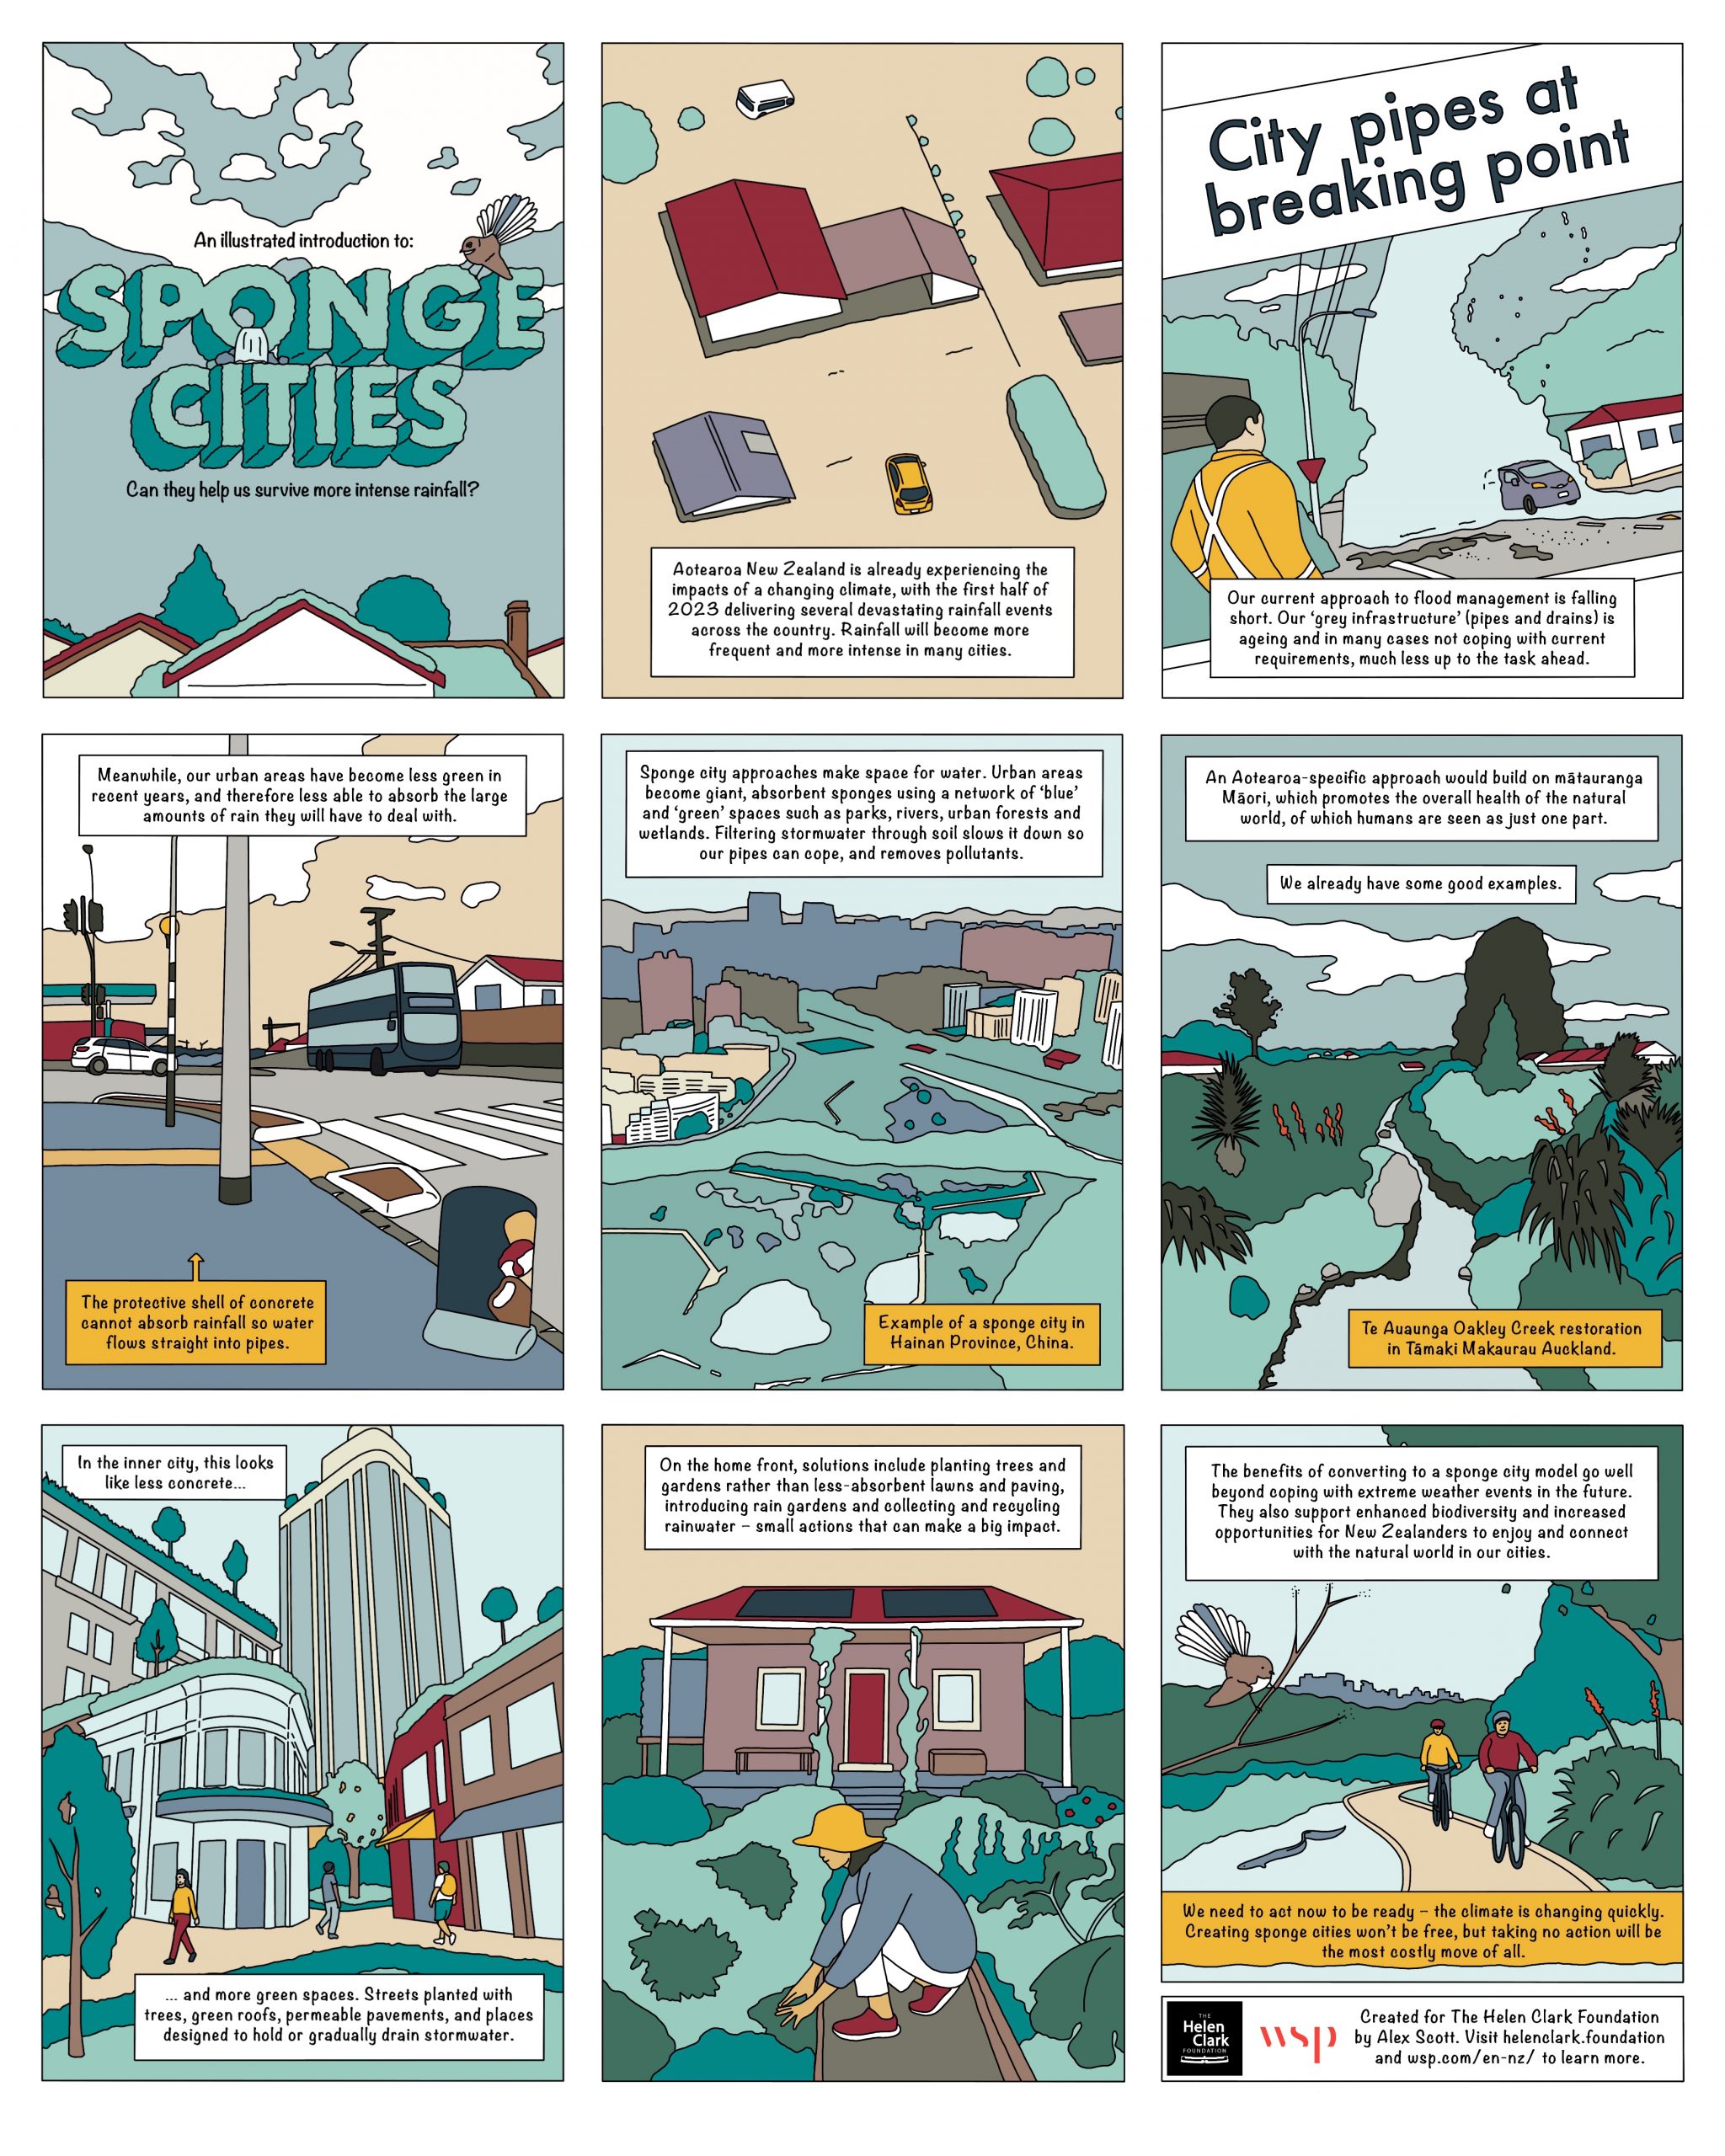 Comic illustrating the principles of Sponge Cities and how they can inform more resilient urban design to cope with climate change